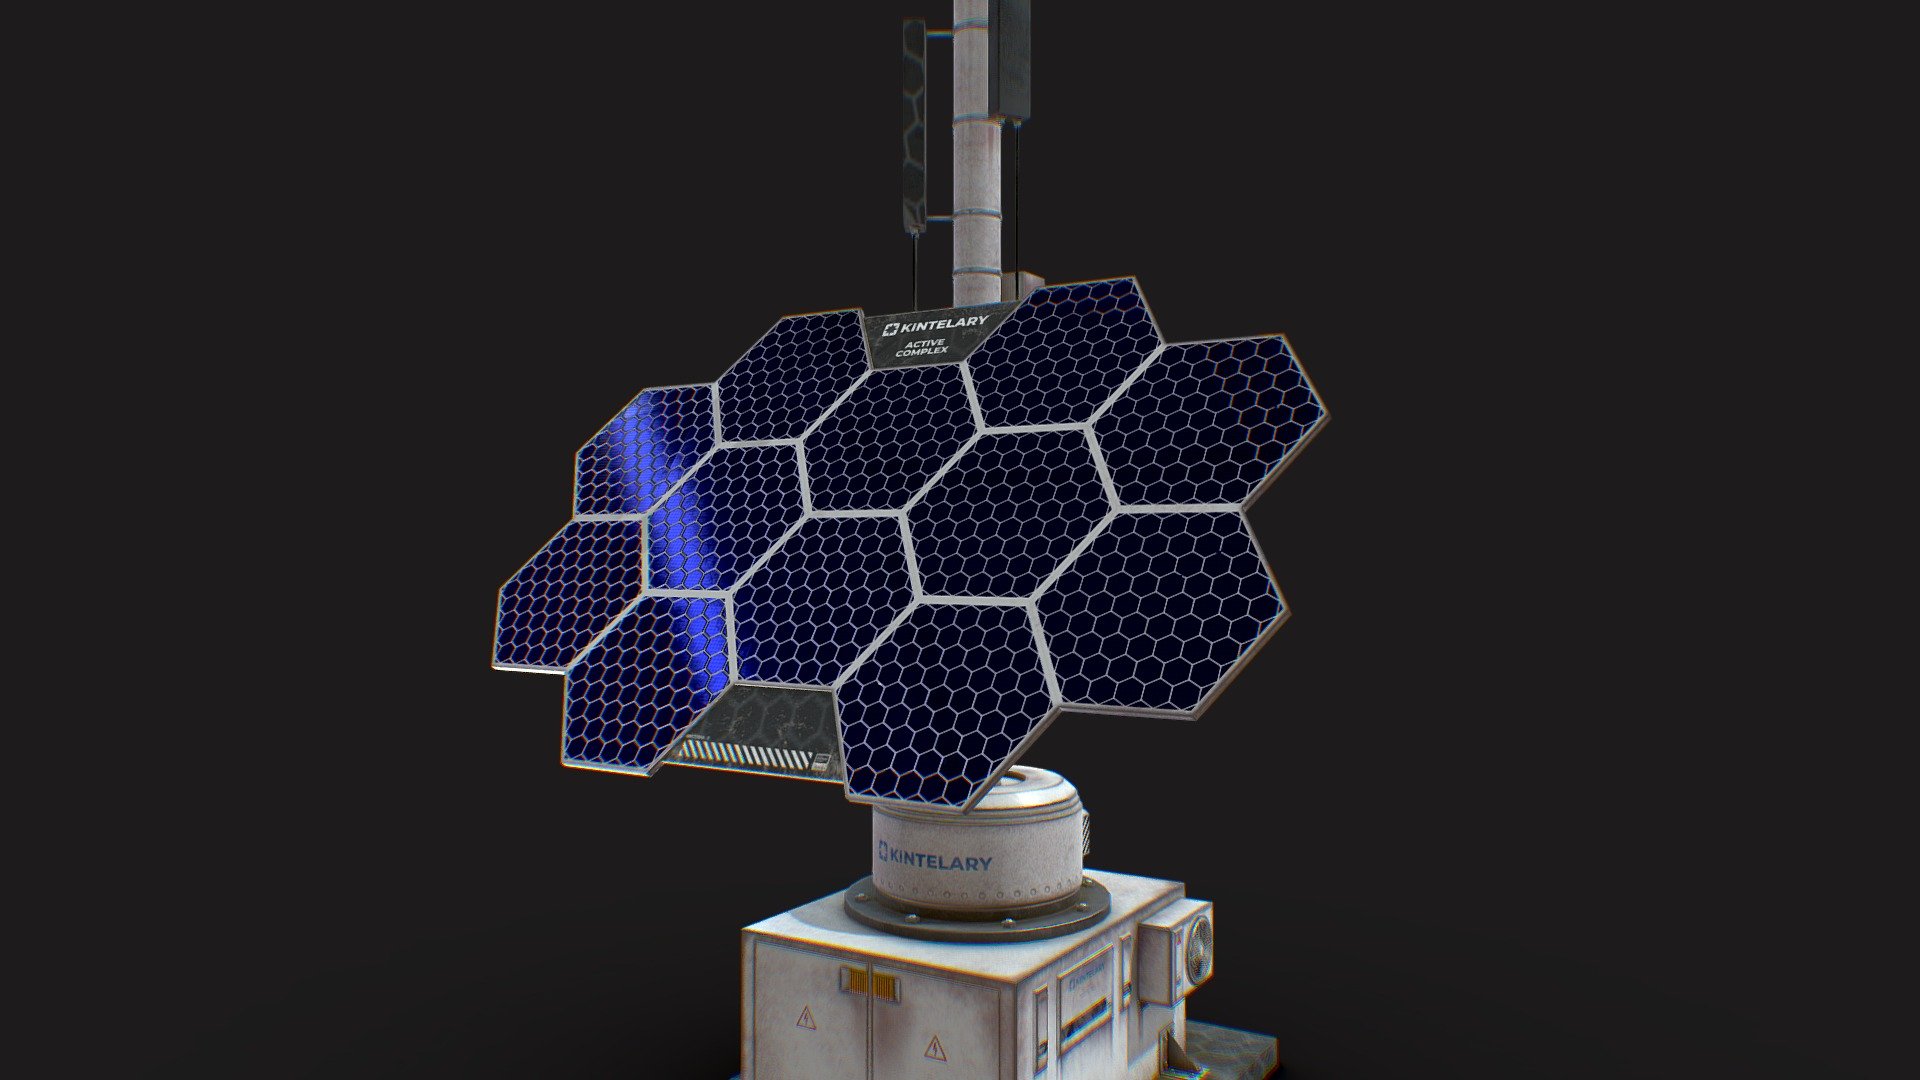 DESCRIPTION
- Different versions of 3ds max scenes are provided.
- Provides full textures for the Solar Panels Scene, Prop, as well as an HDRI-map. Textures in the resolution of 4096x4096. Enjoy using! :) - Solar Panels 3 - Buy Royalty Free 3D model by sergey.koznov 3d model